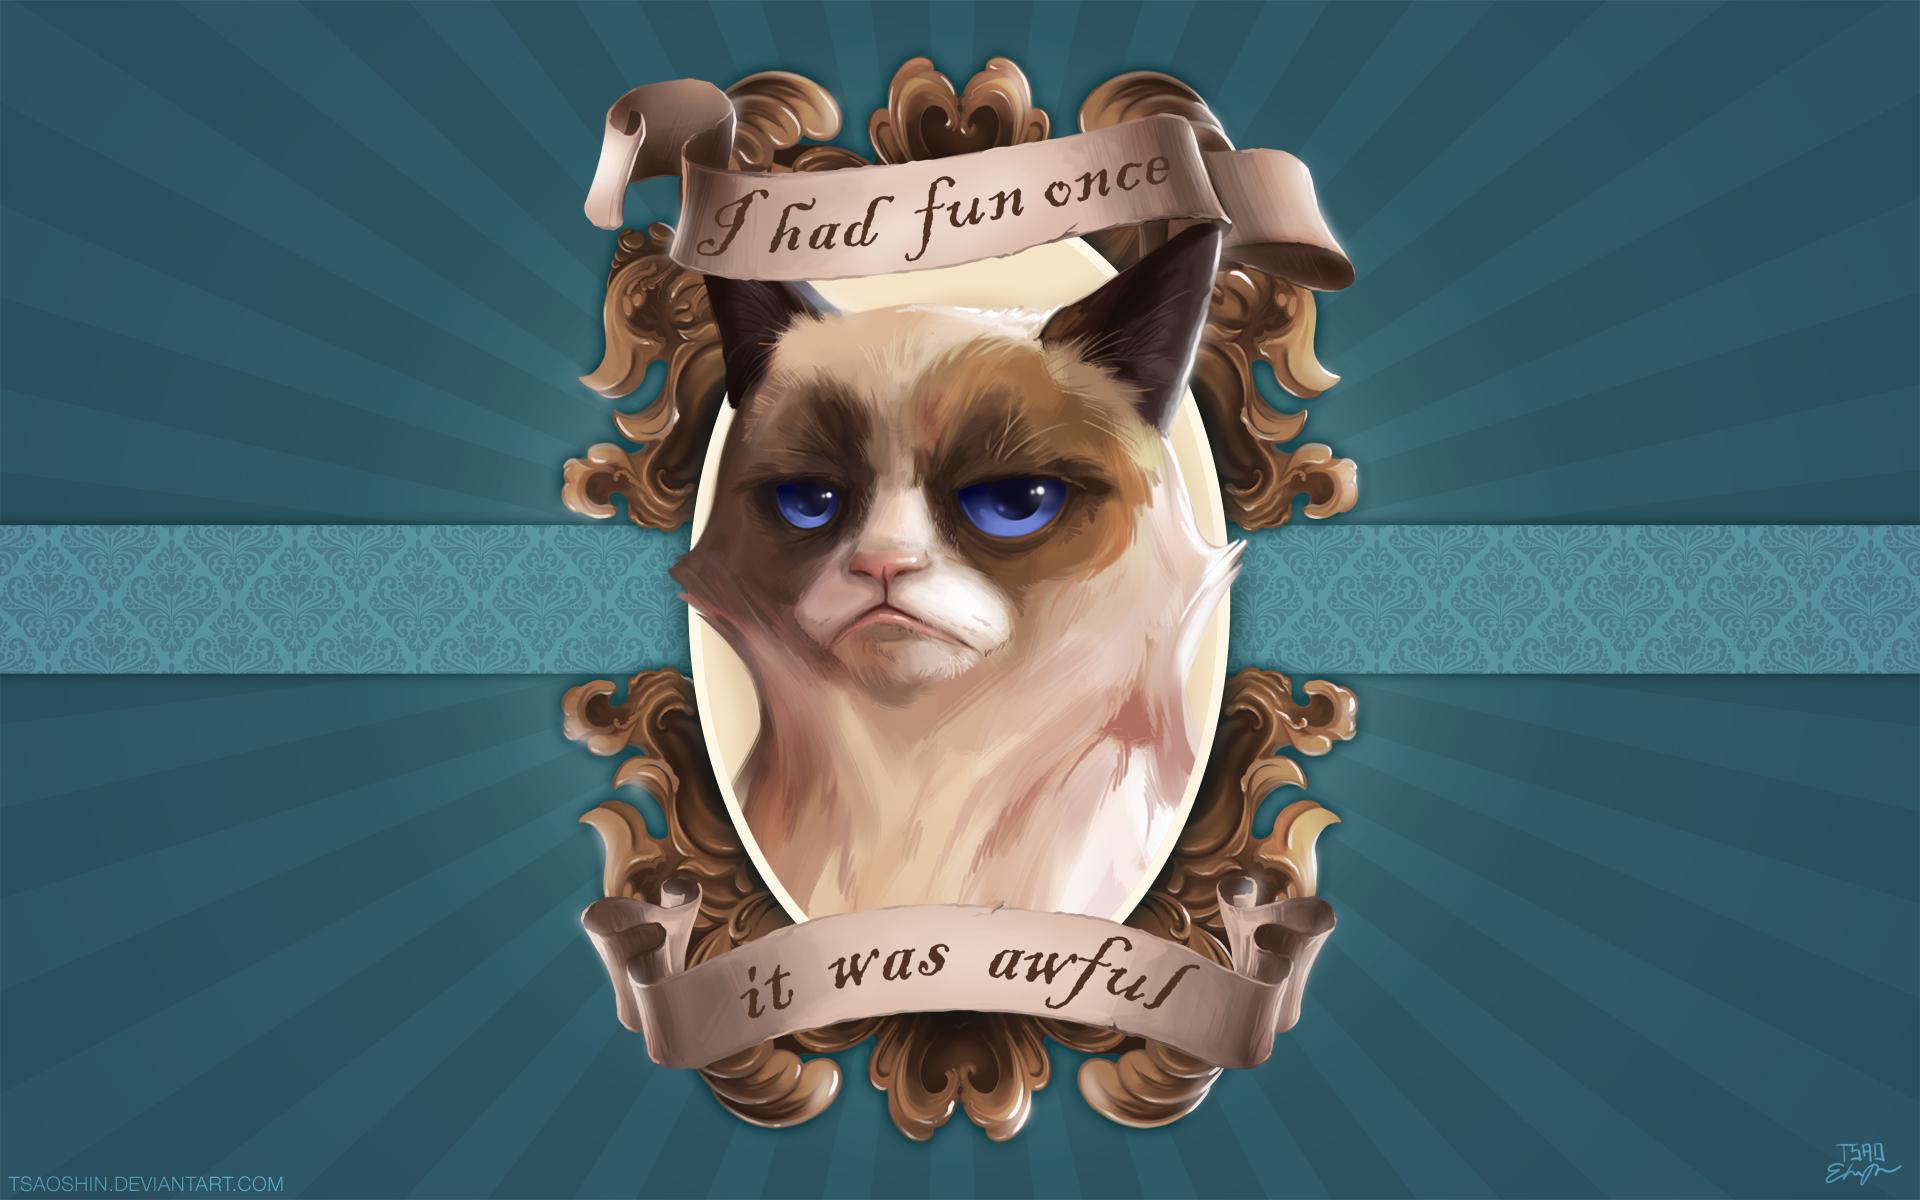 1920 x 1200 · jpeg - This is What Happens When You Mix Grumpy Cat and Disney Films